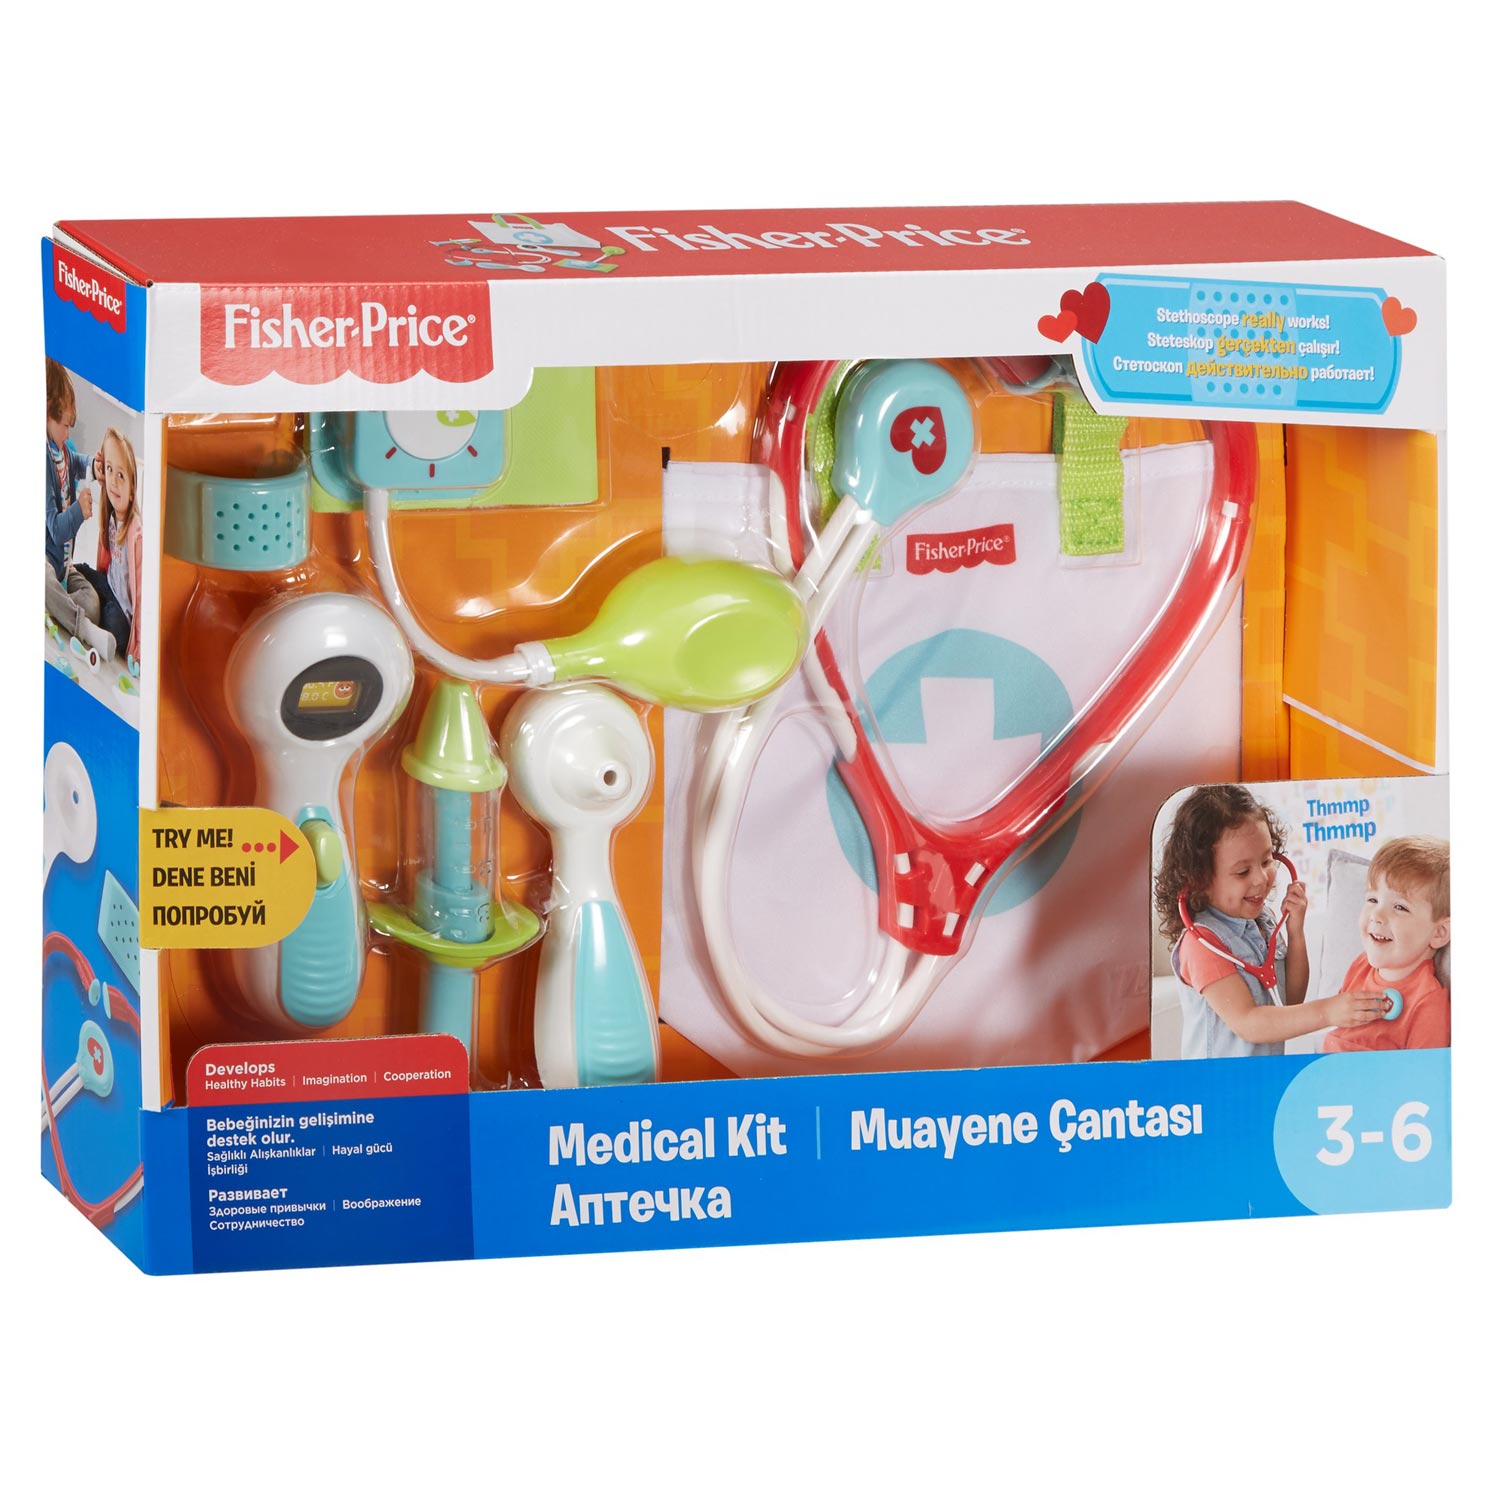 FISHER PRICE DOKTERSSET - 4 10 20 30 40 50 60 70 80 90 100 110 120 130 140 150 160 170 180 190 200 210 220 230 240 250 260 270 280 290 300 310 320 330 337 - 481126